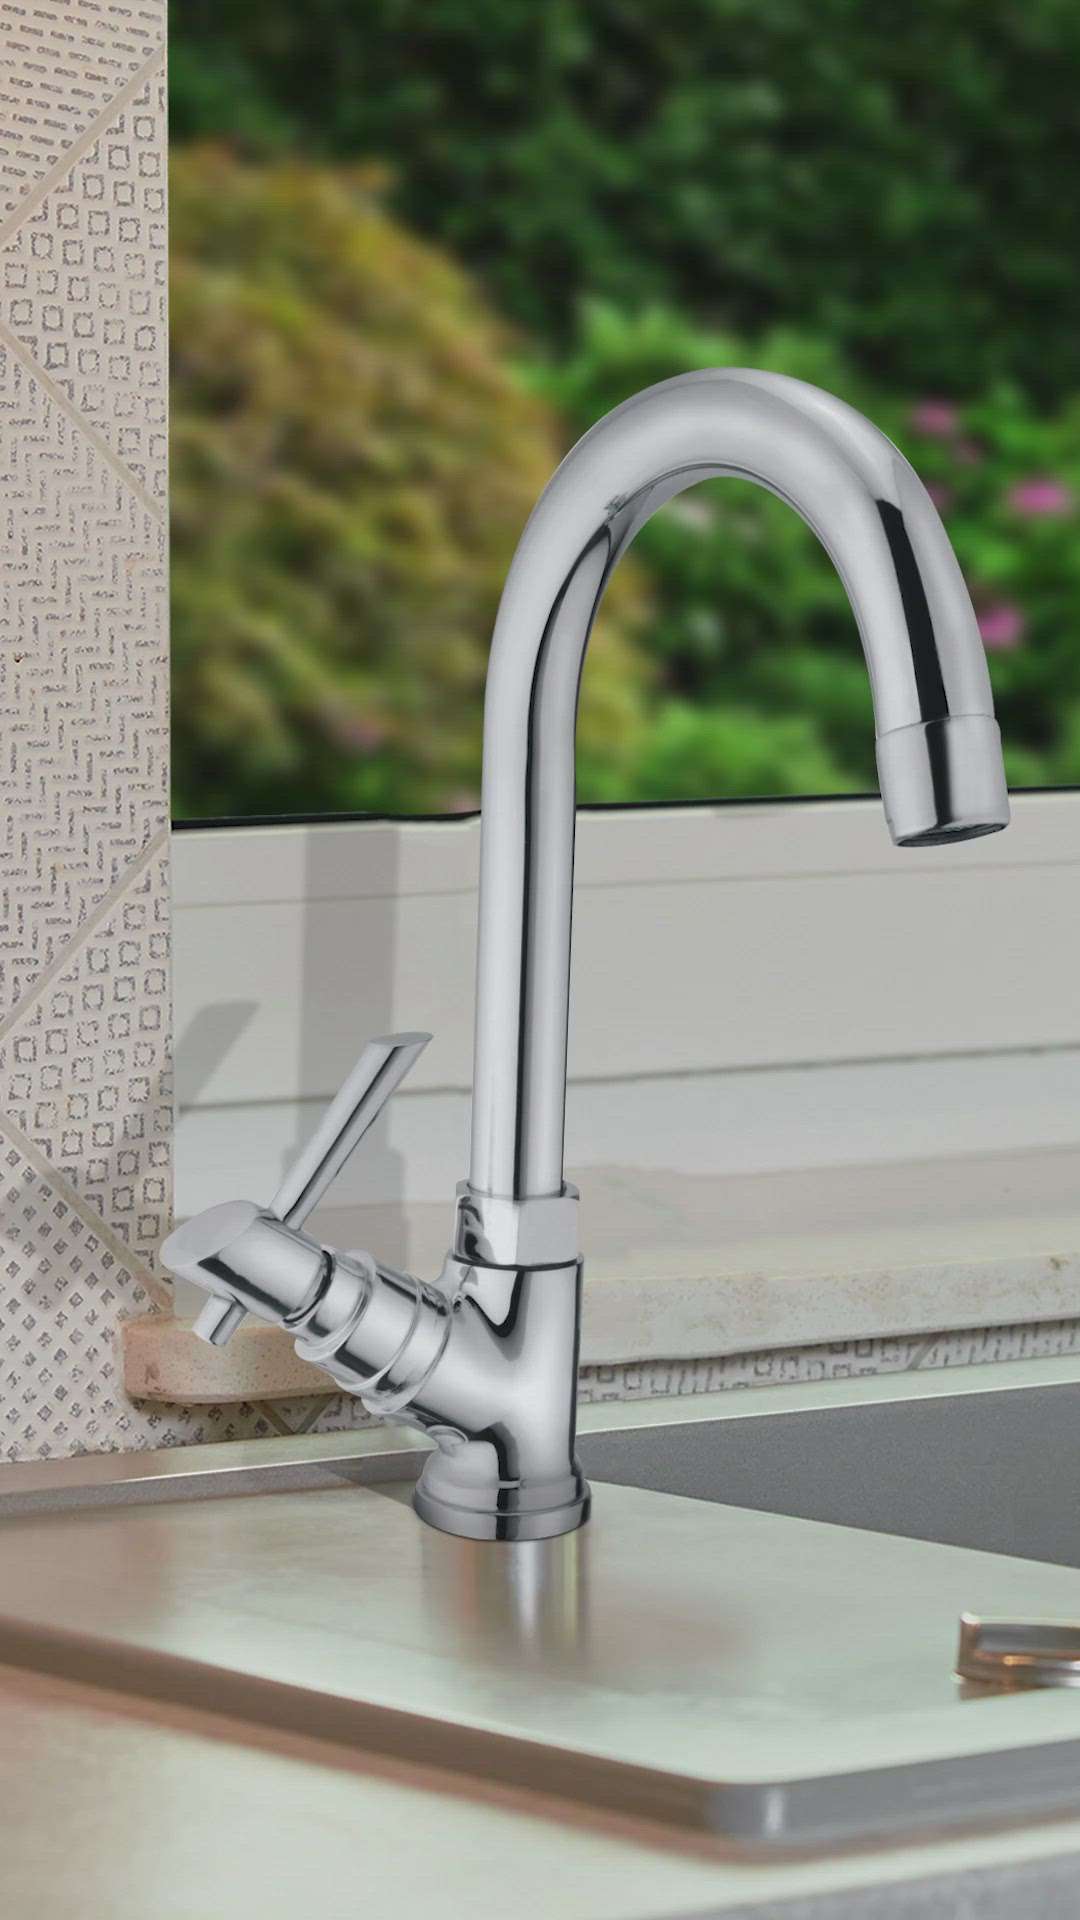 Stylish and attractive faucets for your kitchen, and be ready to make a difference in kitchen planning.

Message us, for more details.

#abchauzindia #ABCGroup #kitchenfaucets #basinmixer #kitchensink #kitchendecor #kitchendesignideas #kitchendesigntrends